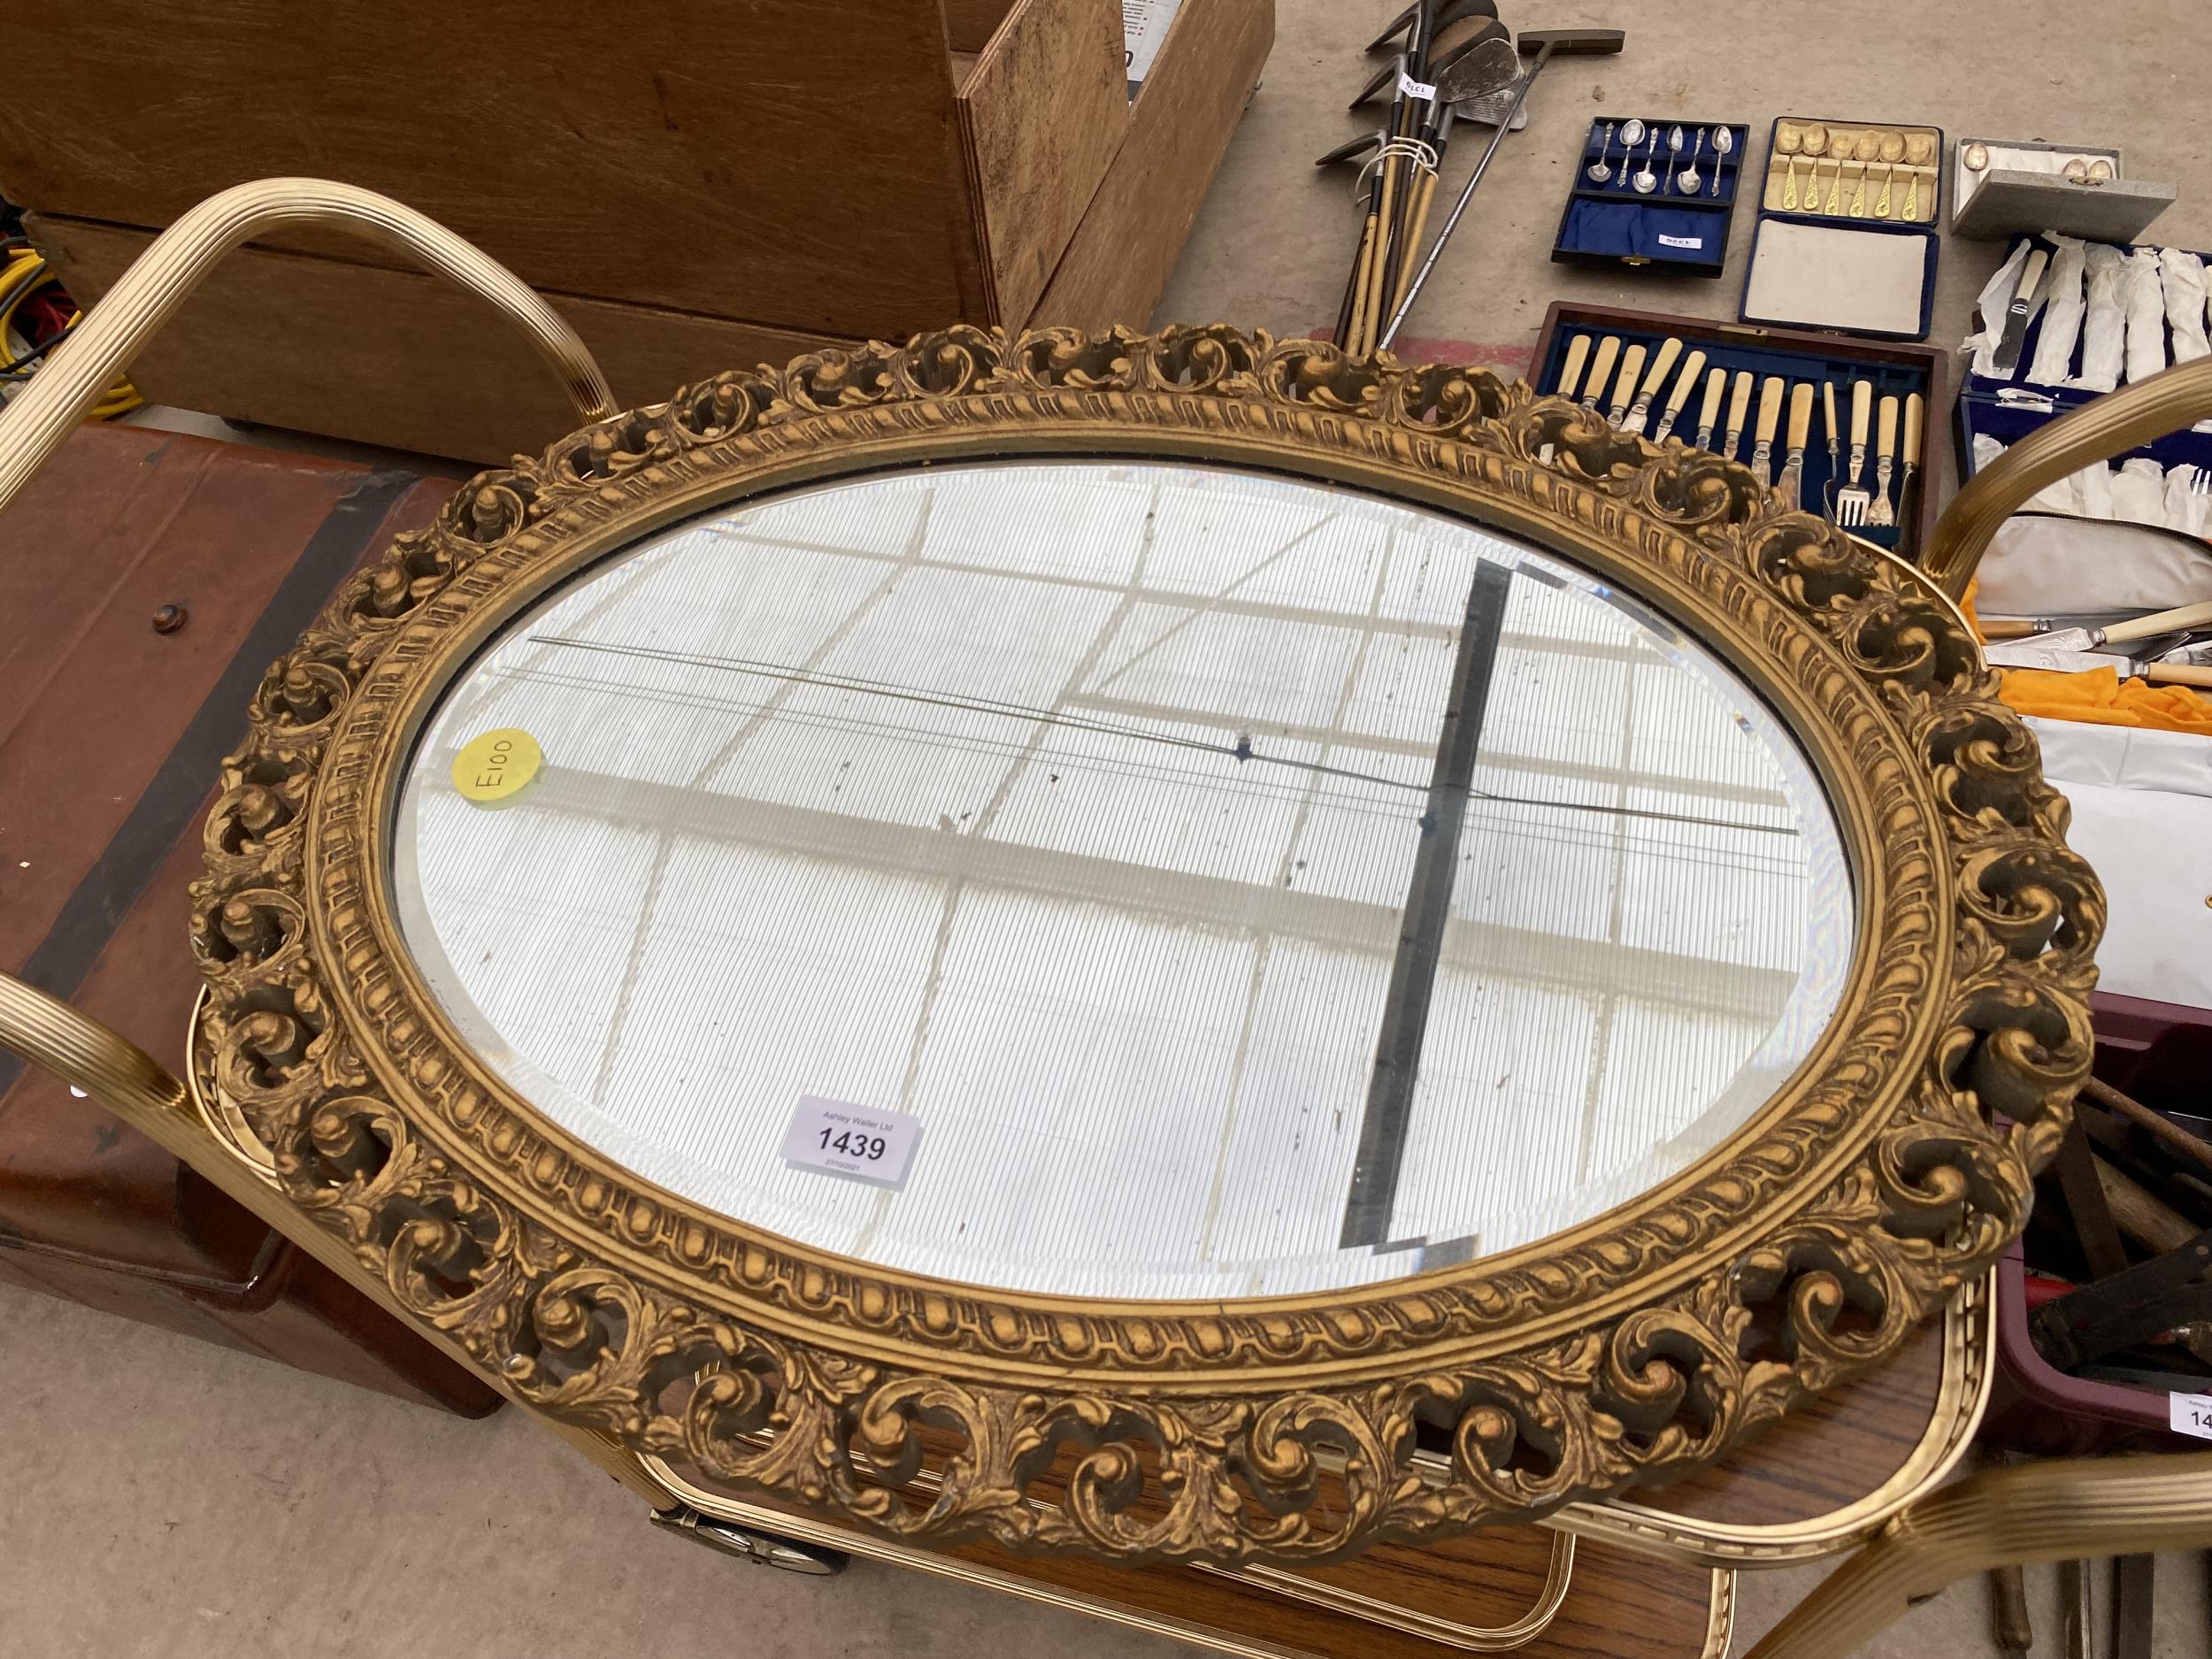 FRAMED BEVELED EDGE MIRROR AND A TWO TIER TROLLEY - Image 2 of 3